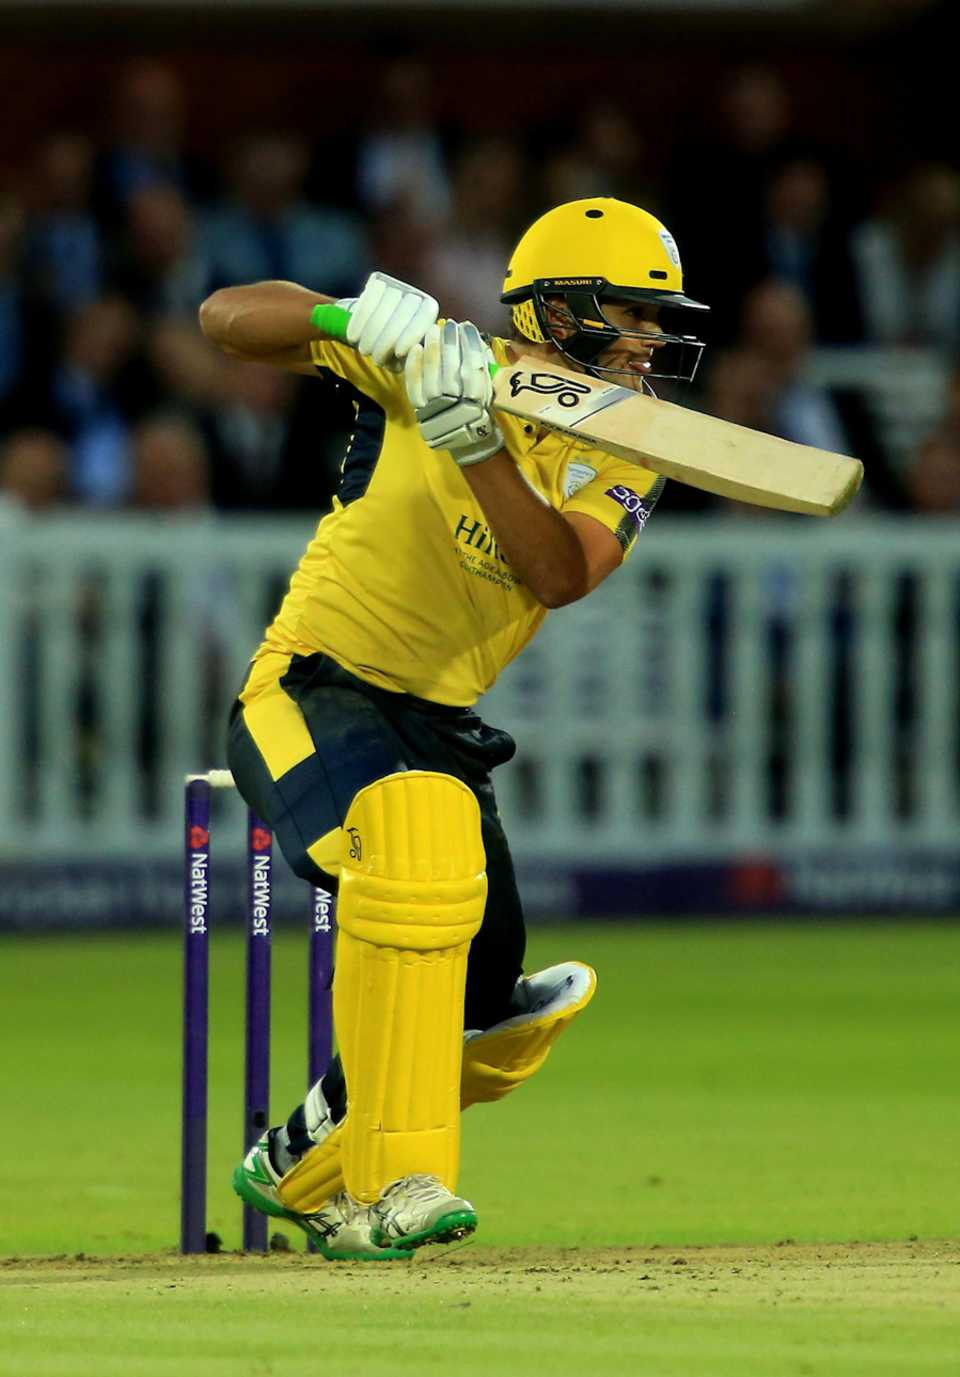 Rilee Rossouw shook off a blow on the helmet to lead Hampshire home